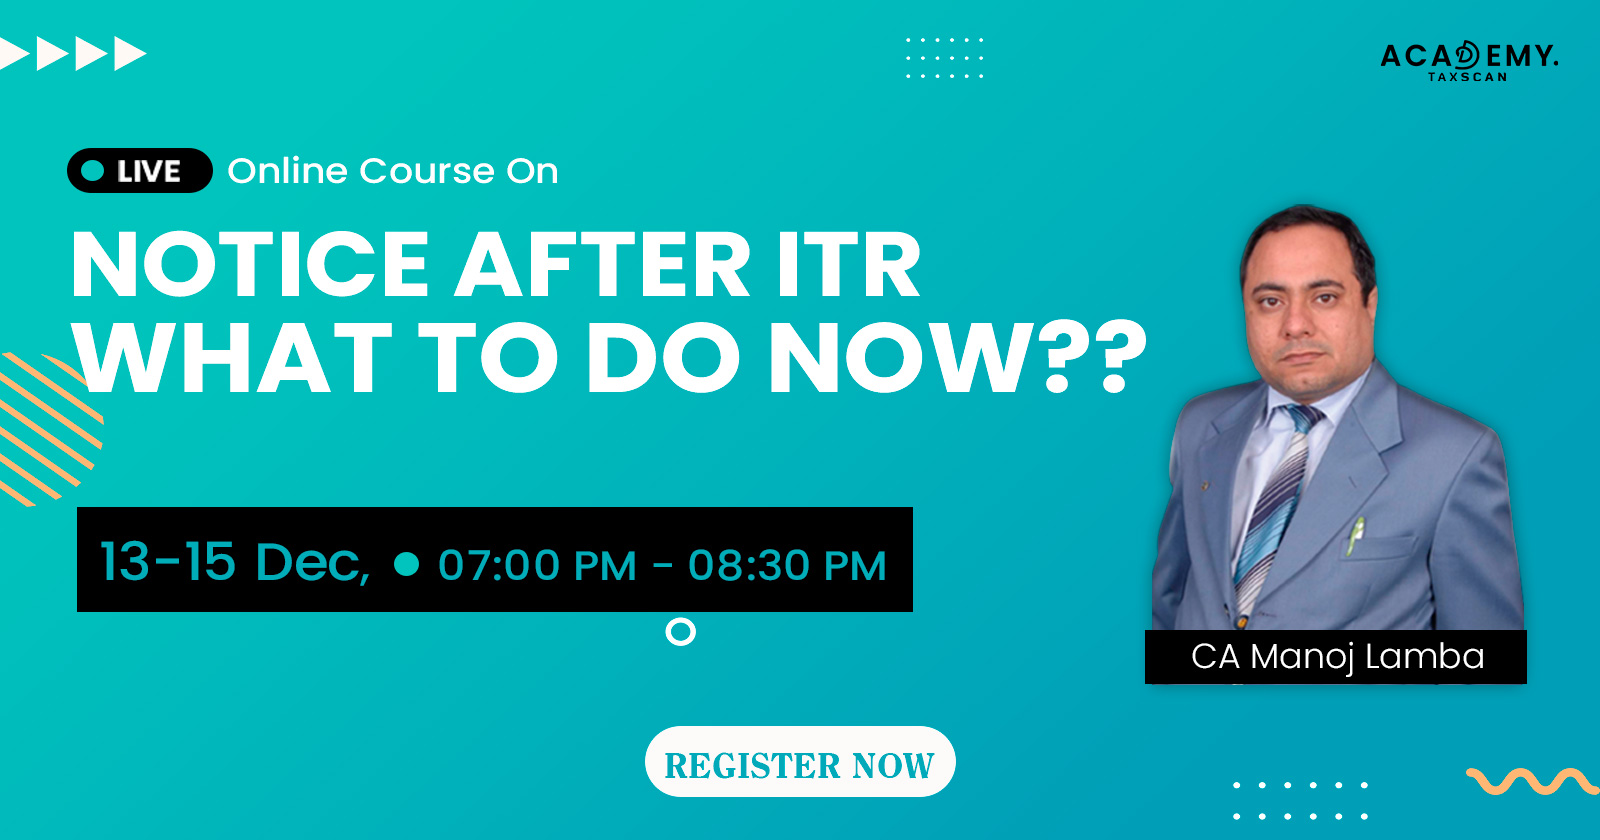 Live Online Course - Notice After ITR - ITR - Notice after itr online - How to check notice on Income Tax portal - How to Validate Bank Accounts - How to make refund reissue request - Taxscan Academy